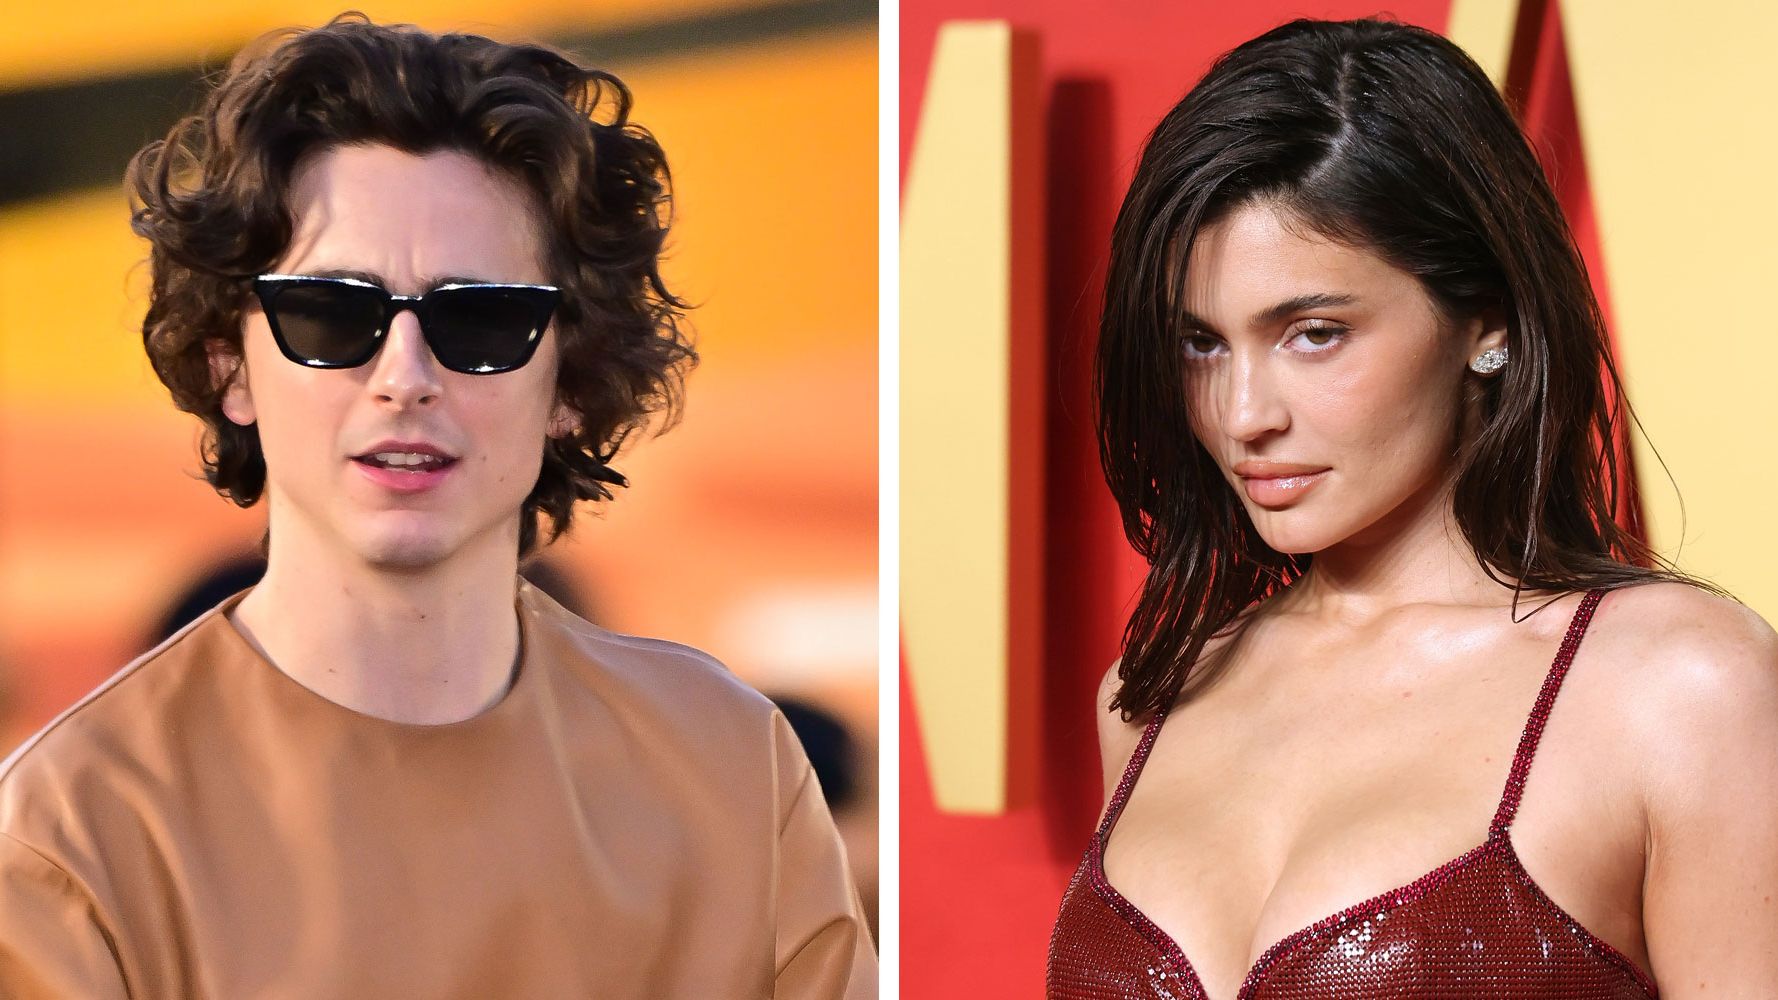 Why Timothée Chalamet Wasn't With Kylie Jenner at Oscar After-Parties